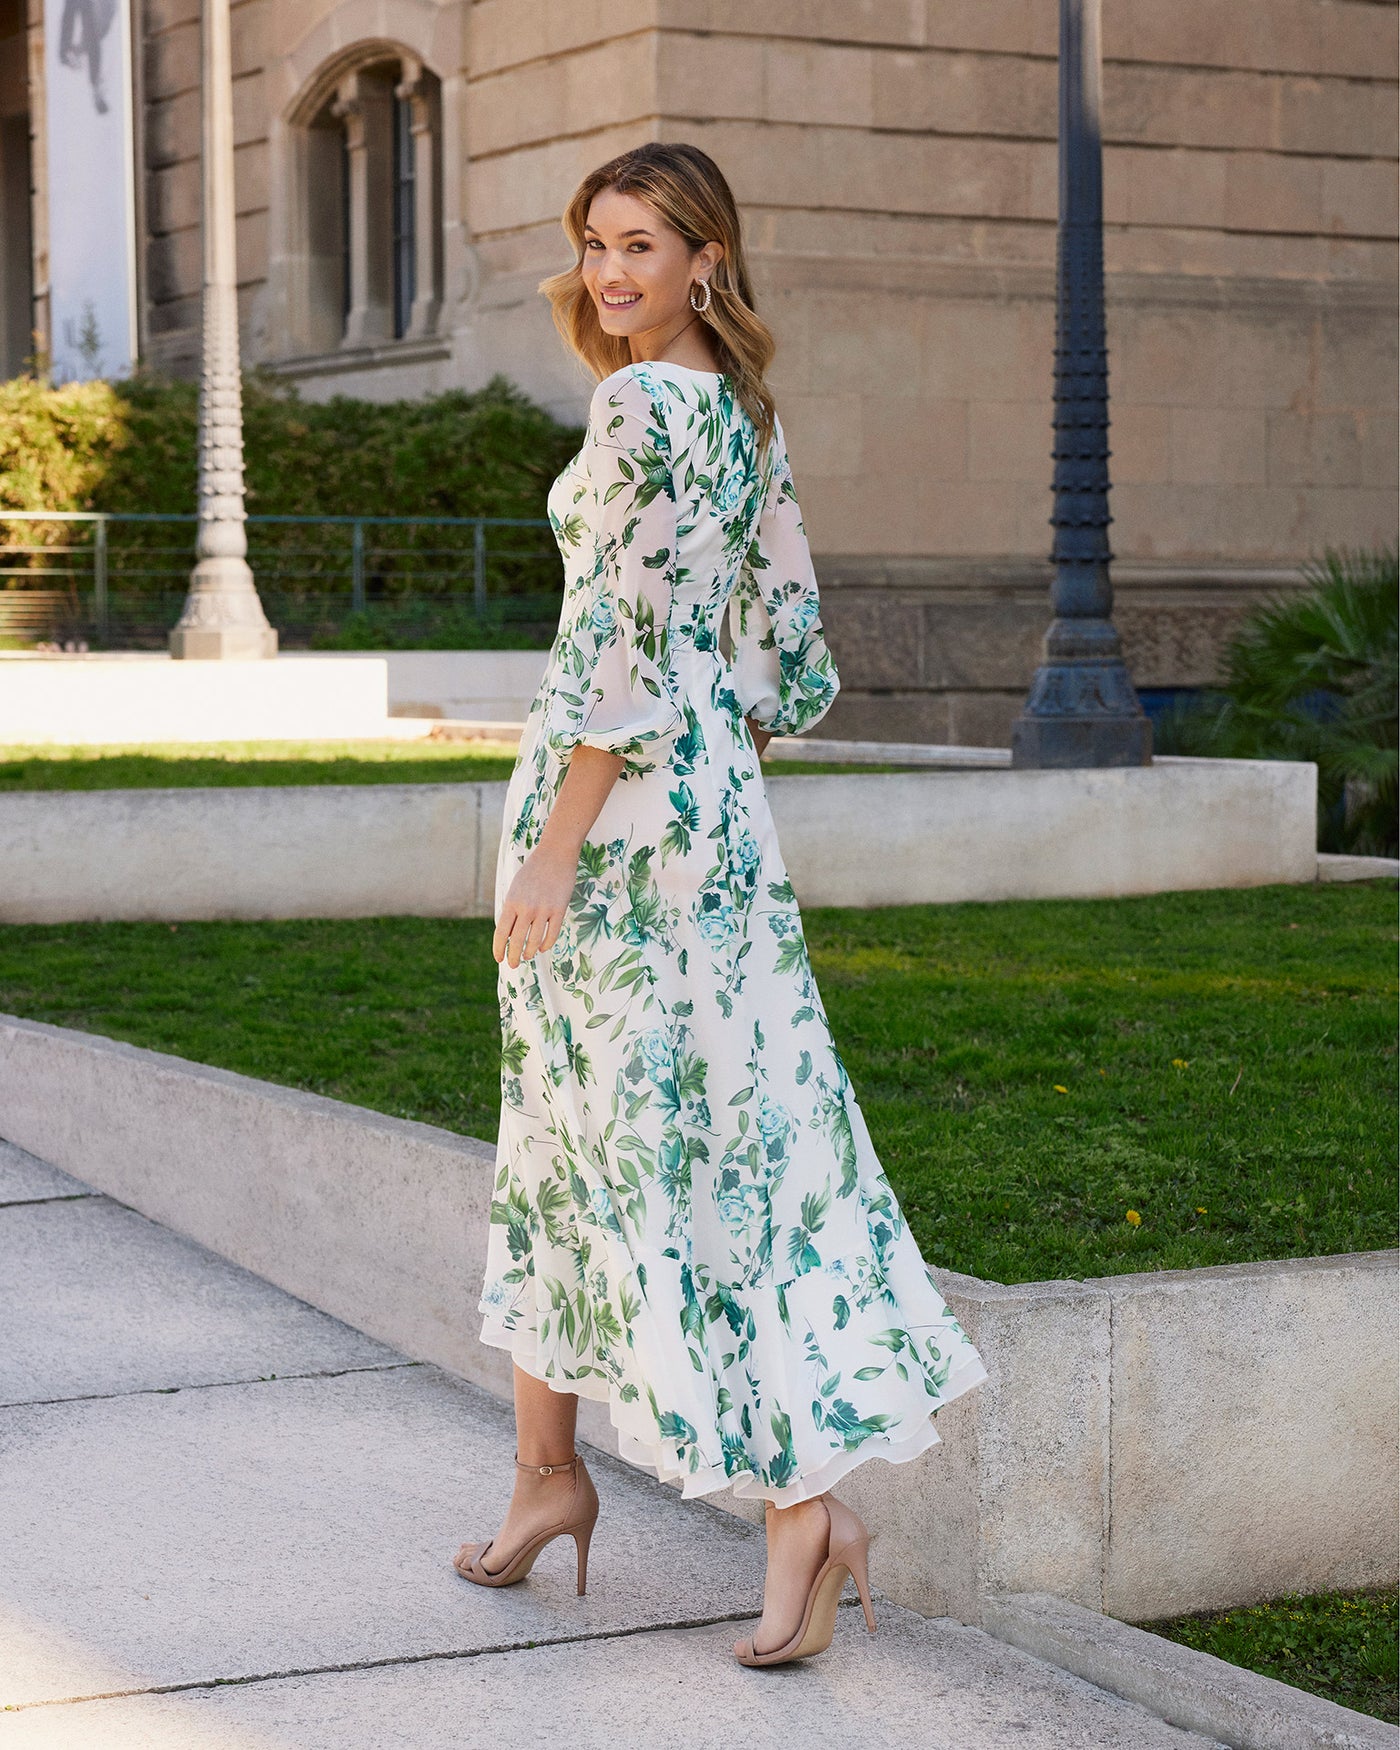 Ivory and Emerald Green Dress with Floral Print